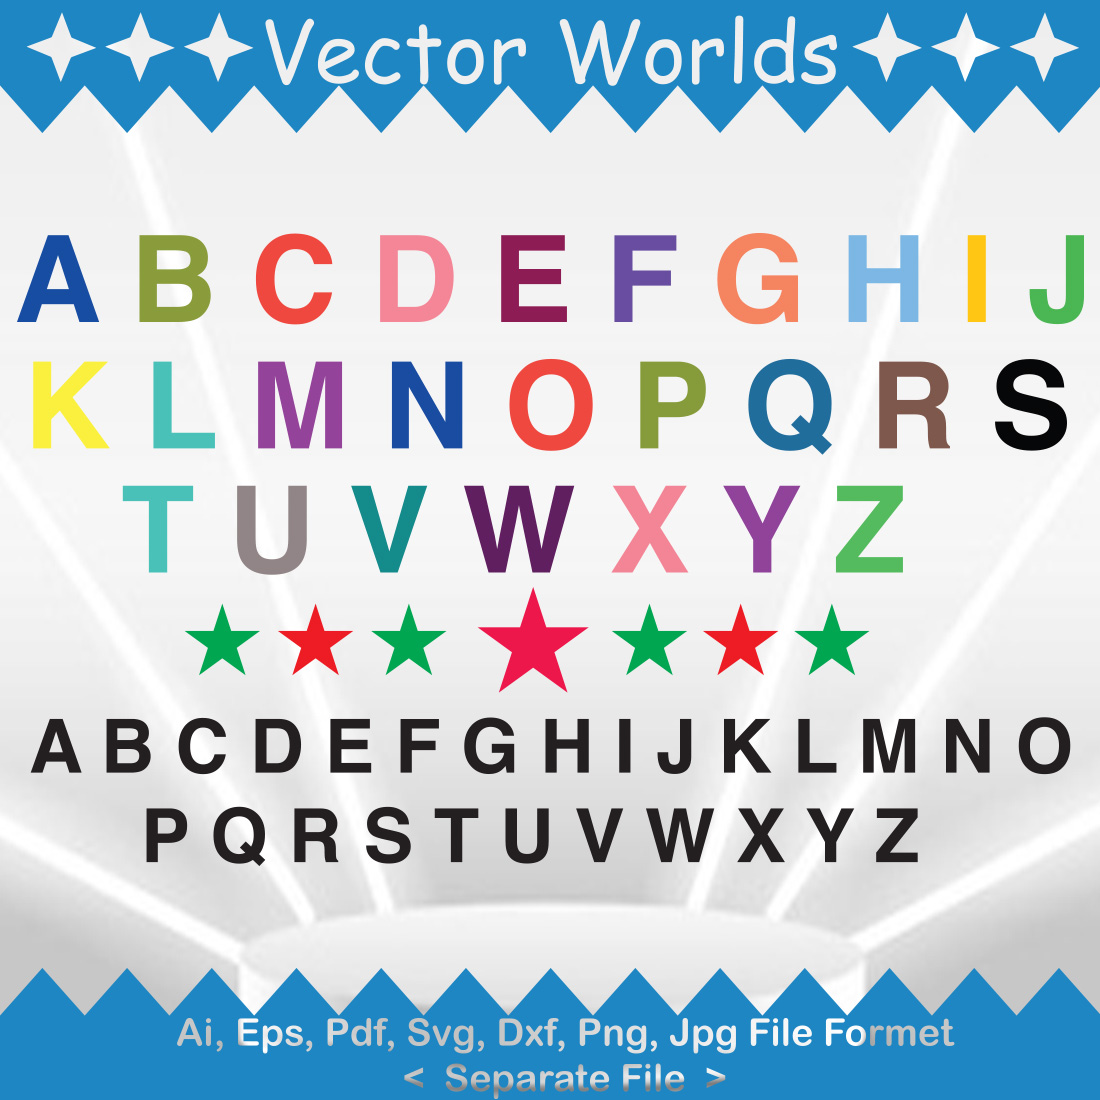 Collection of beautiful vector images of capital letters.